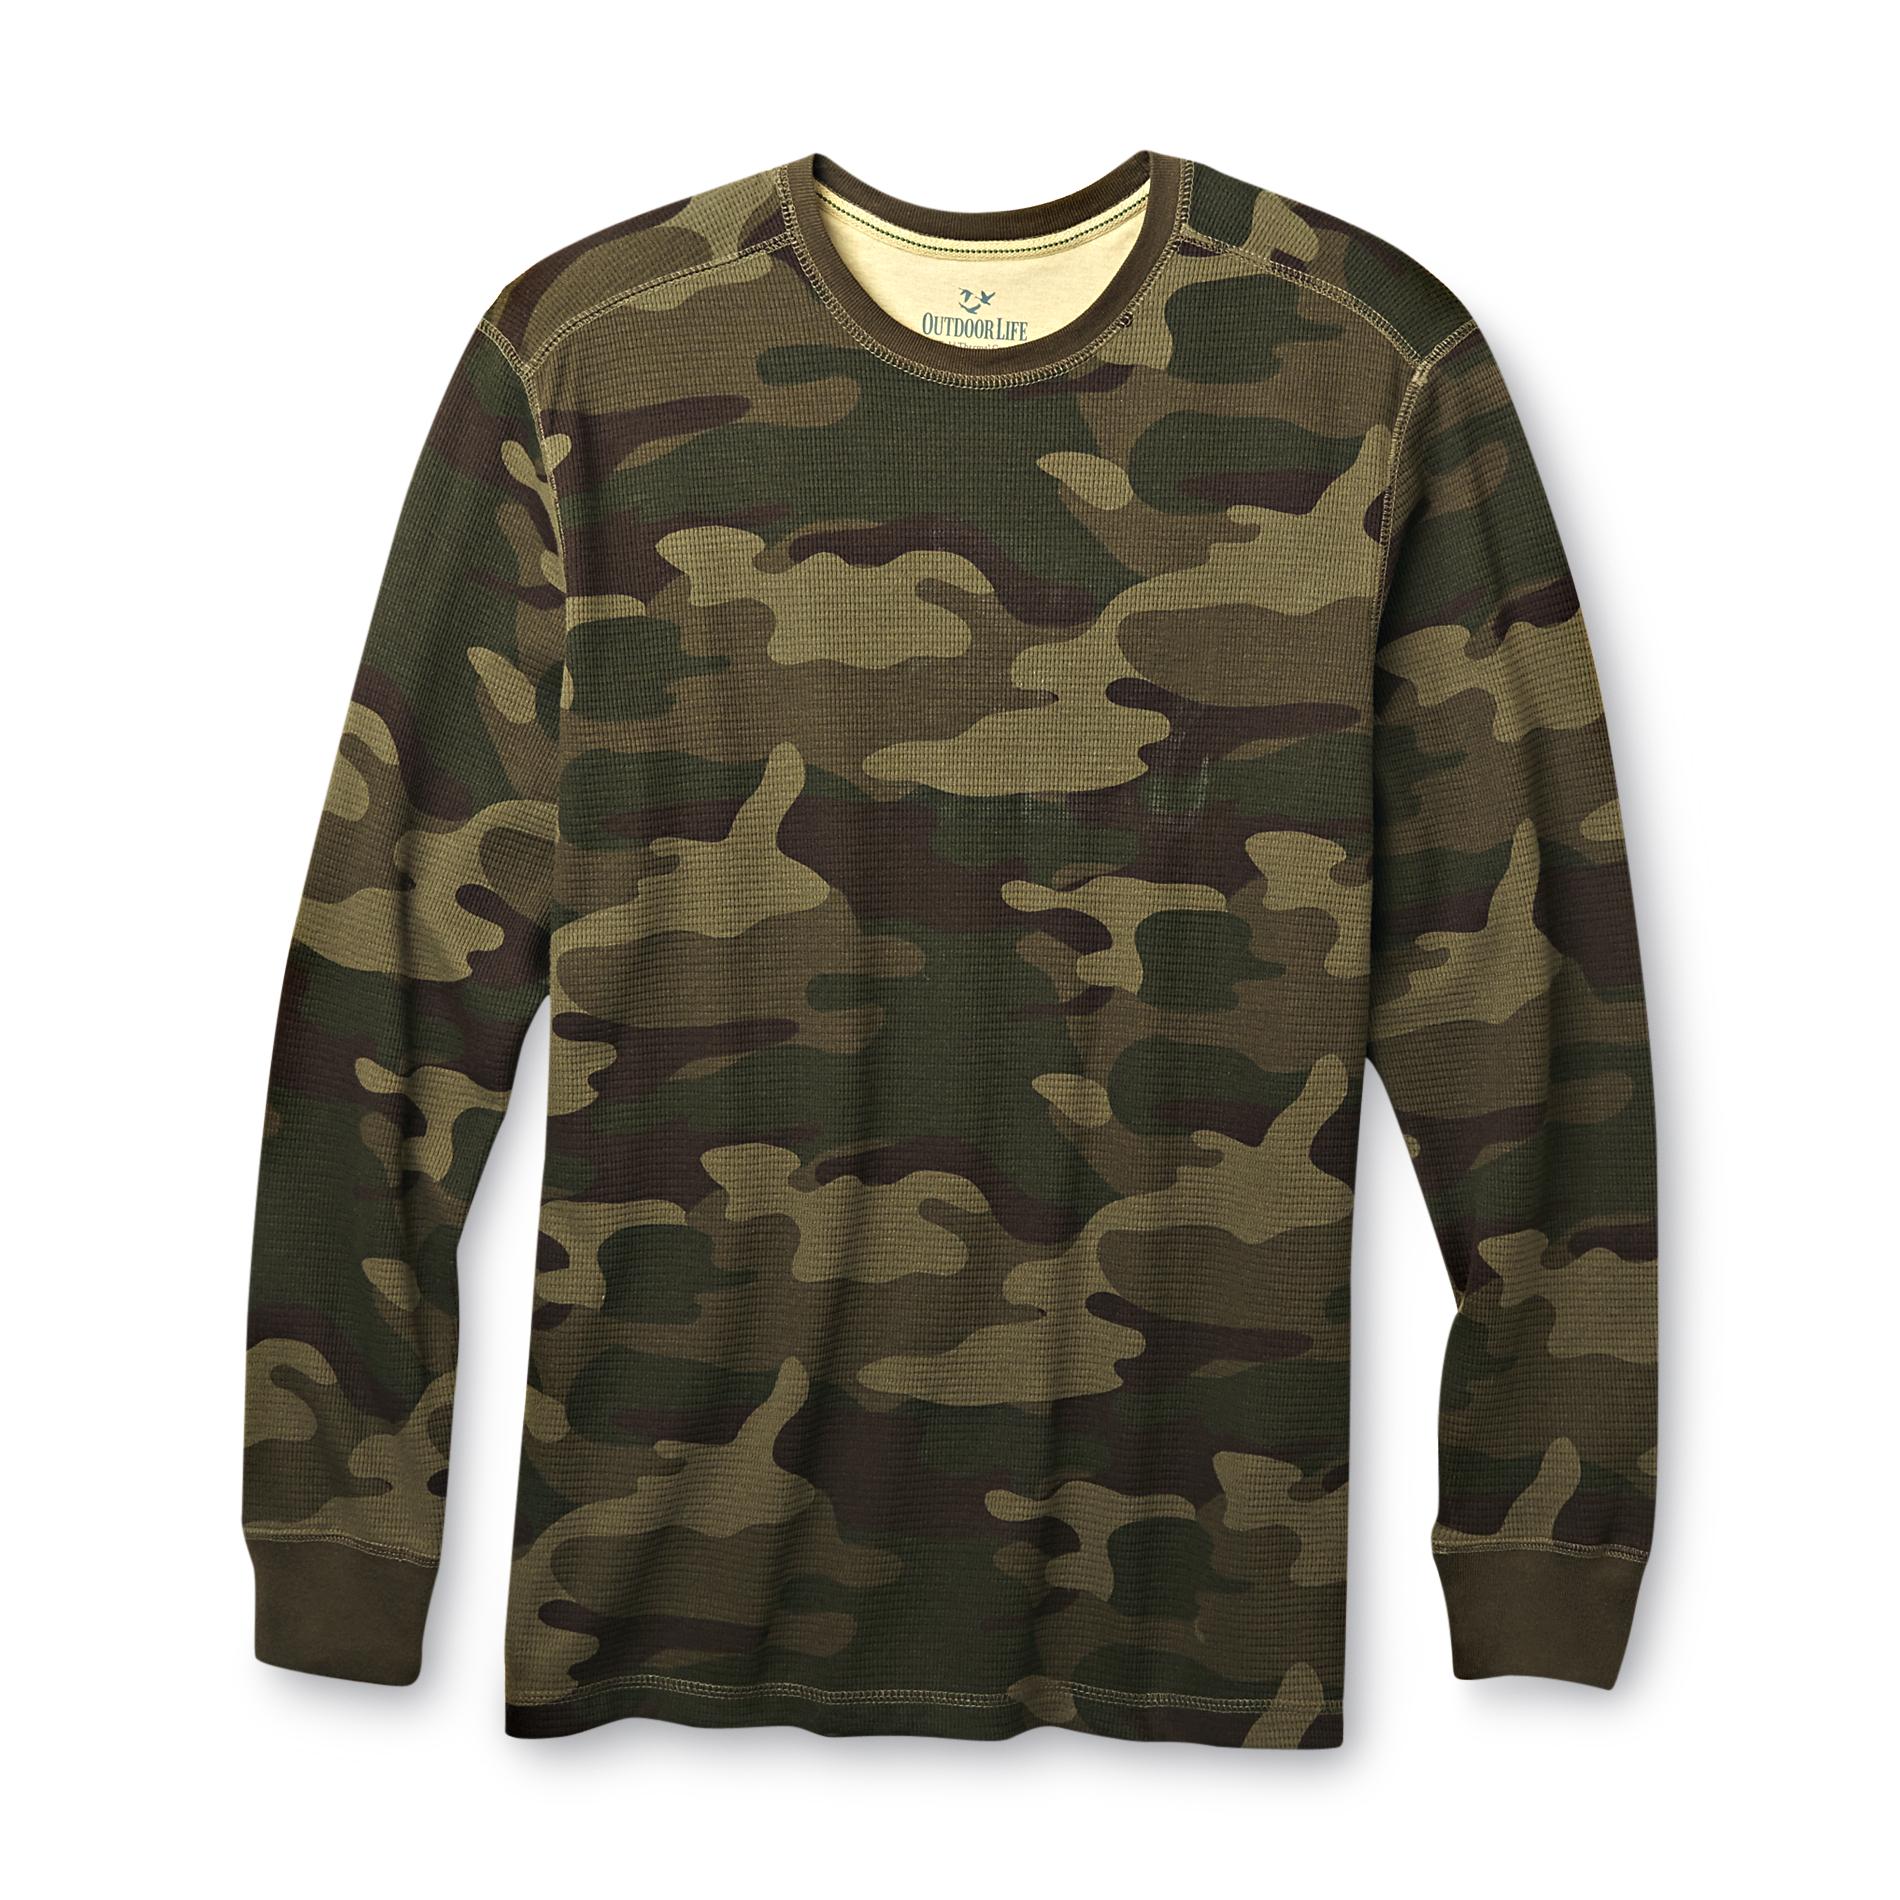 Outdoor Life Men's Big & Tall Thermal Long-Sleeve T-Shirt - Camouflage